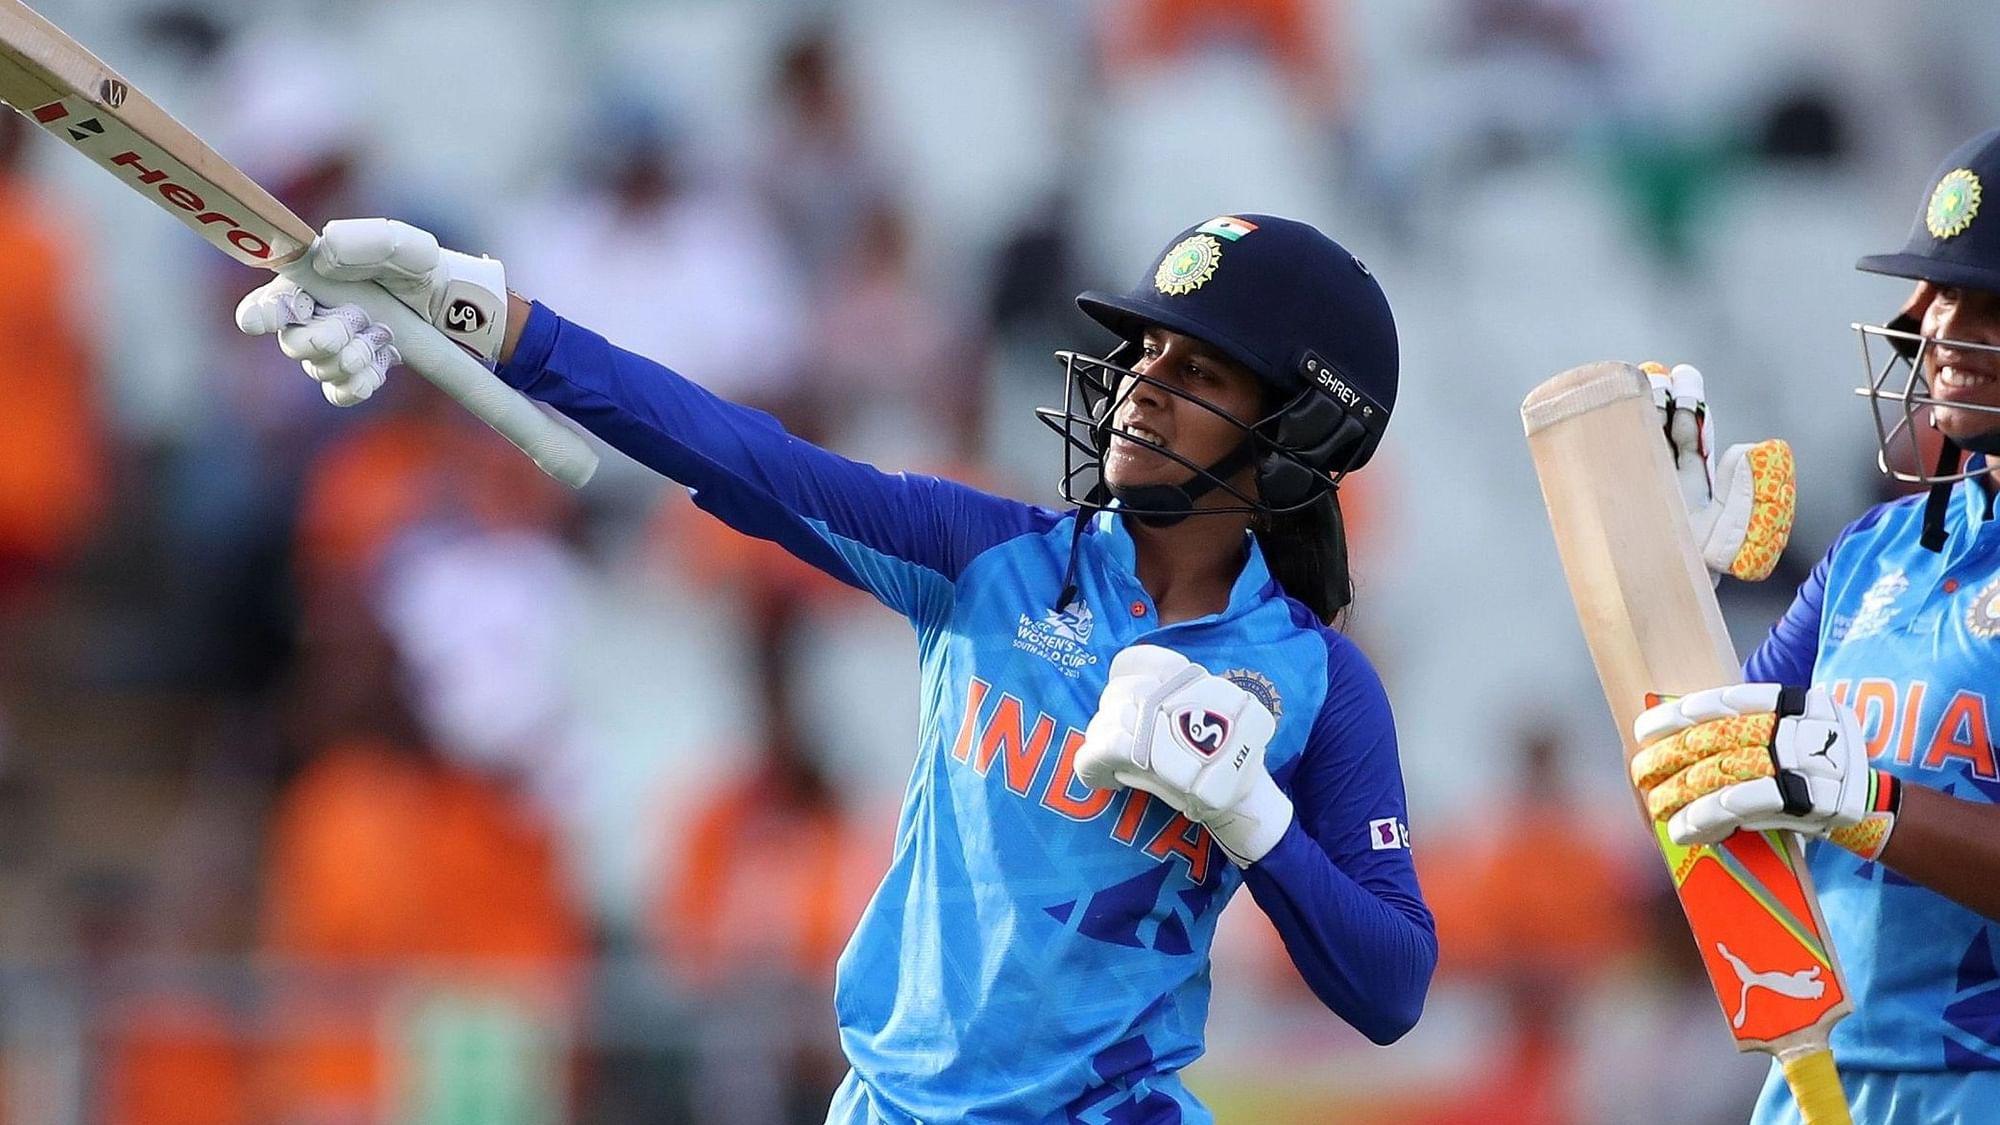 <div class="paragraphs"><p>Jemimah Rodrigues has bagged a major contract in the Women's Premier League auction with Delhi Capitals, earning Rs 2.20 crore.</p></div>